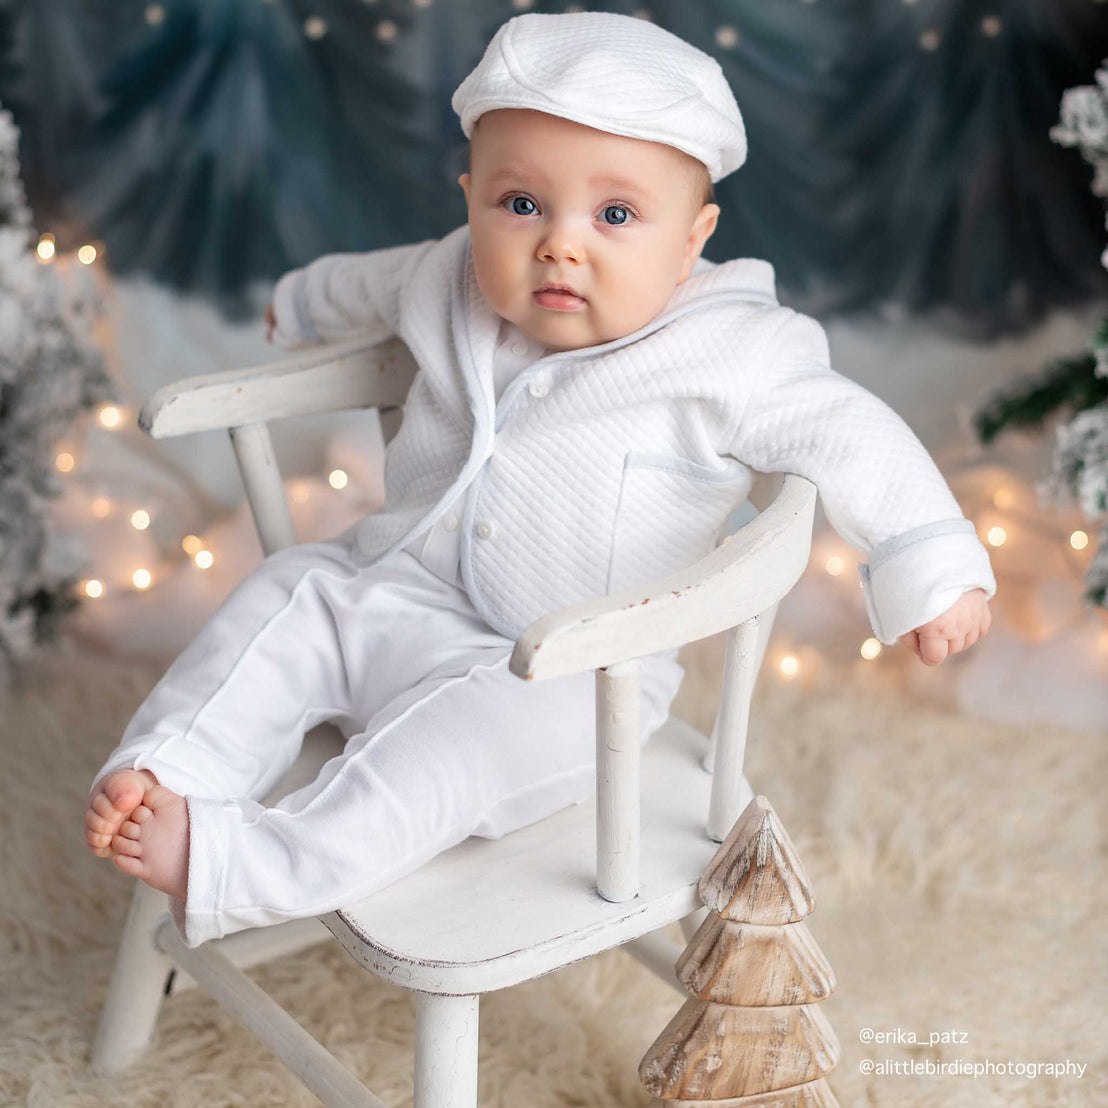 A baby dressed in a Harrison 3-Piece Suit sitting on a small vintage wooden chair with a backdrop of twinkling lights, upscale baptism decorations.